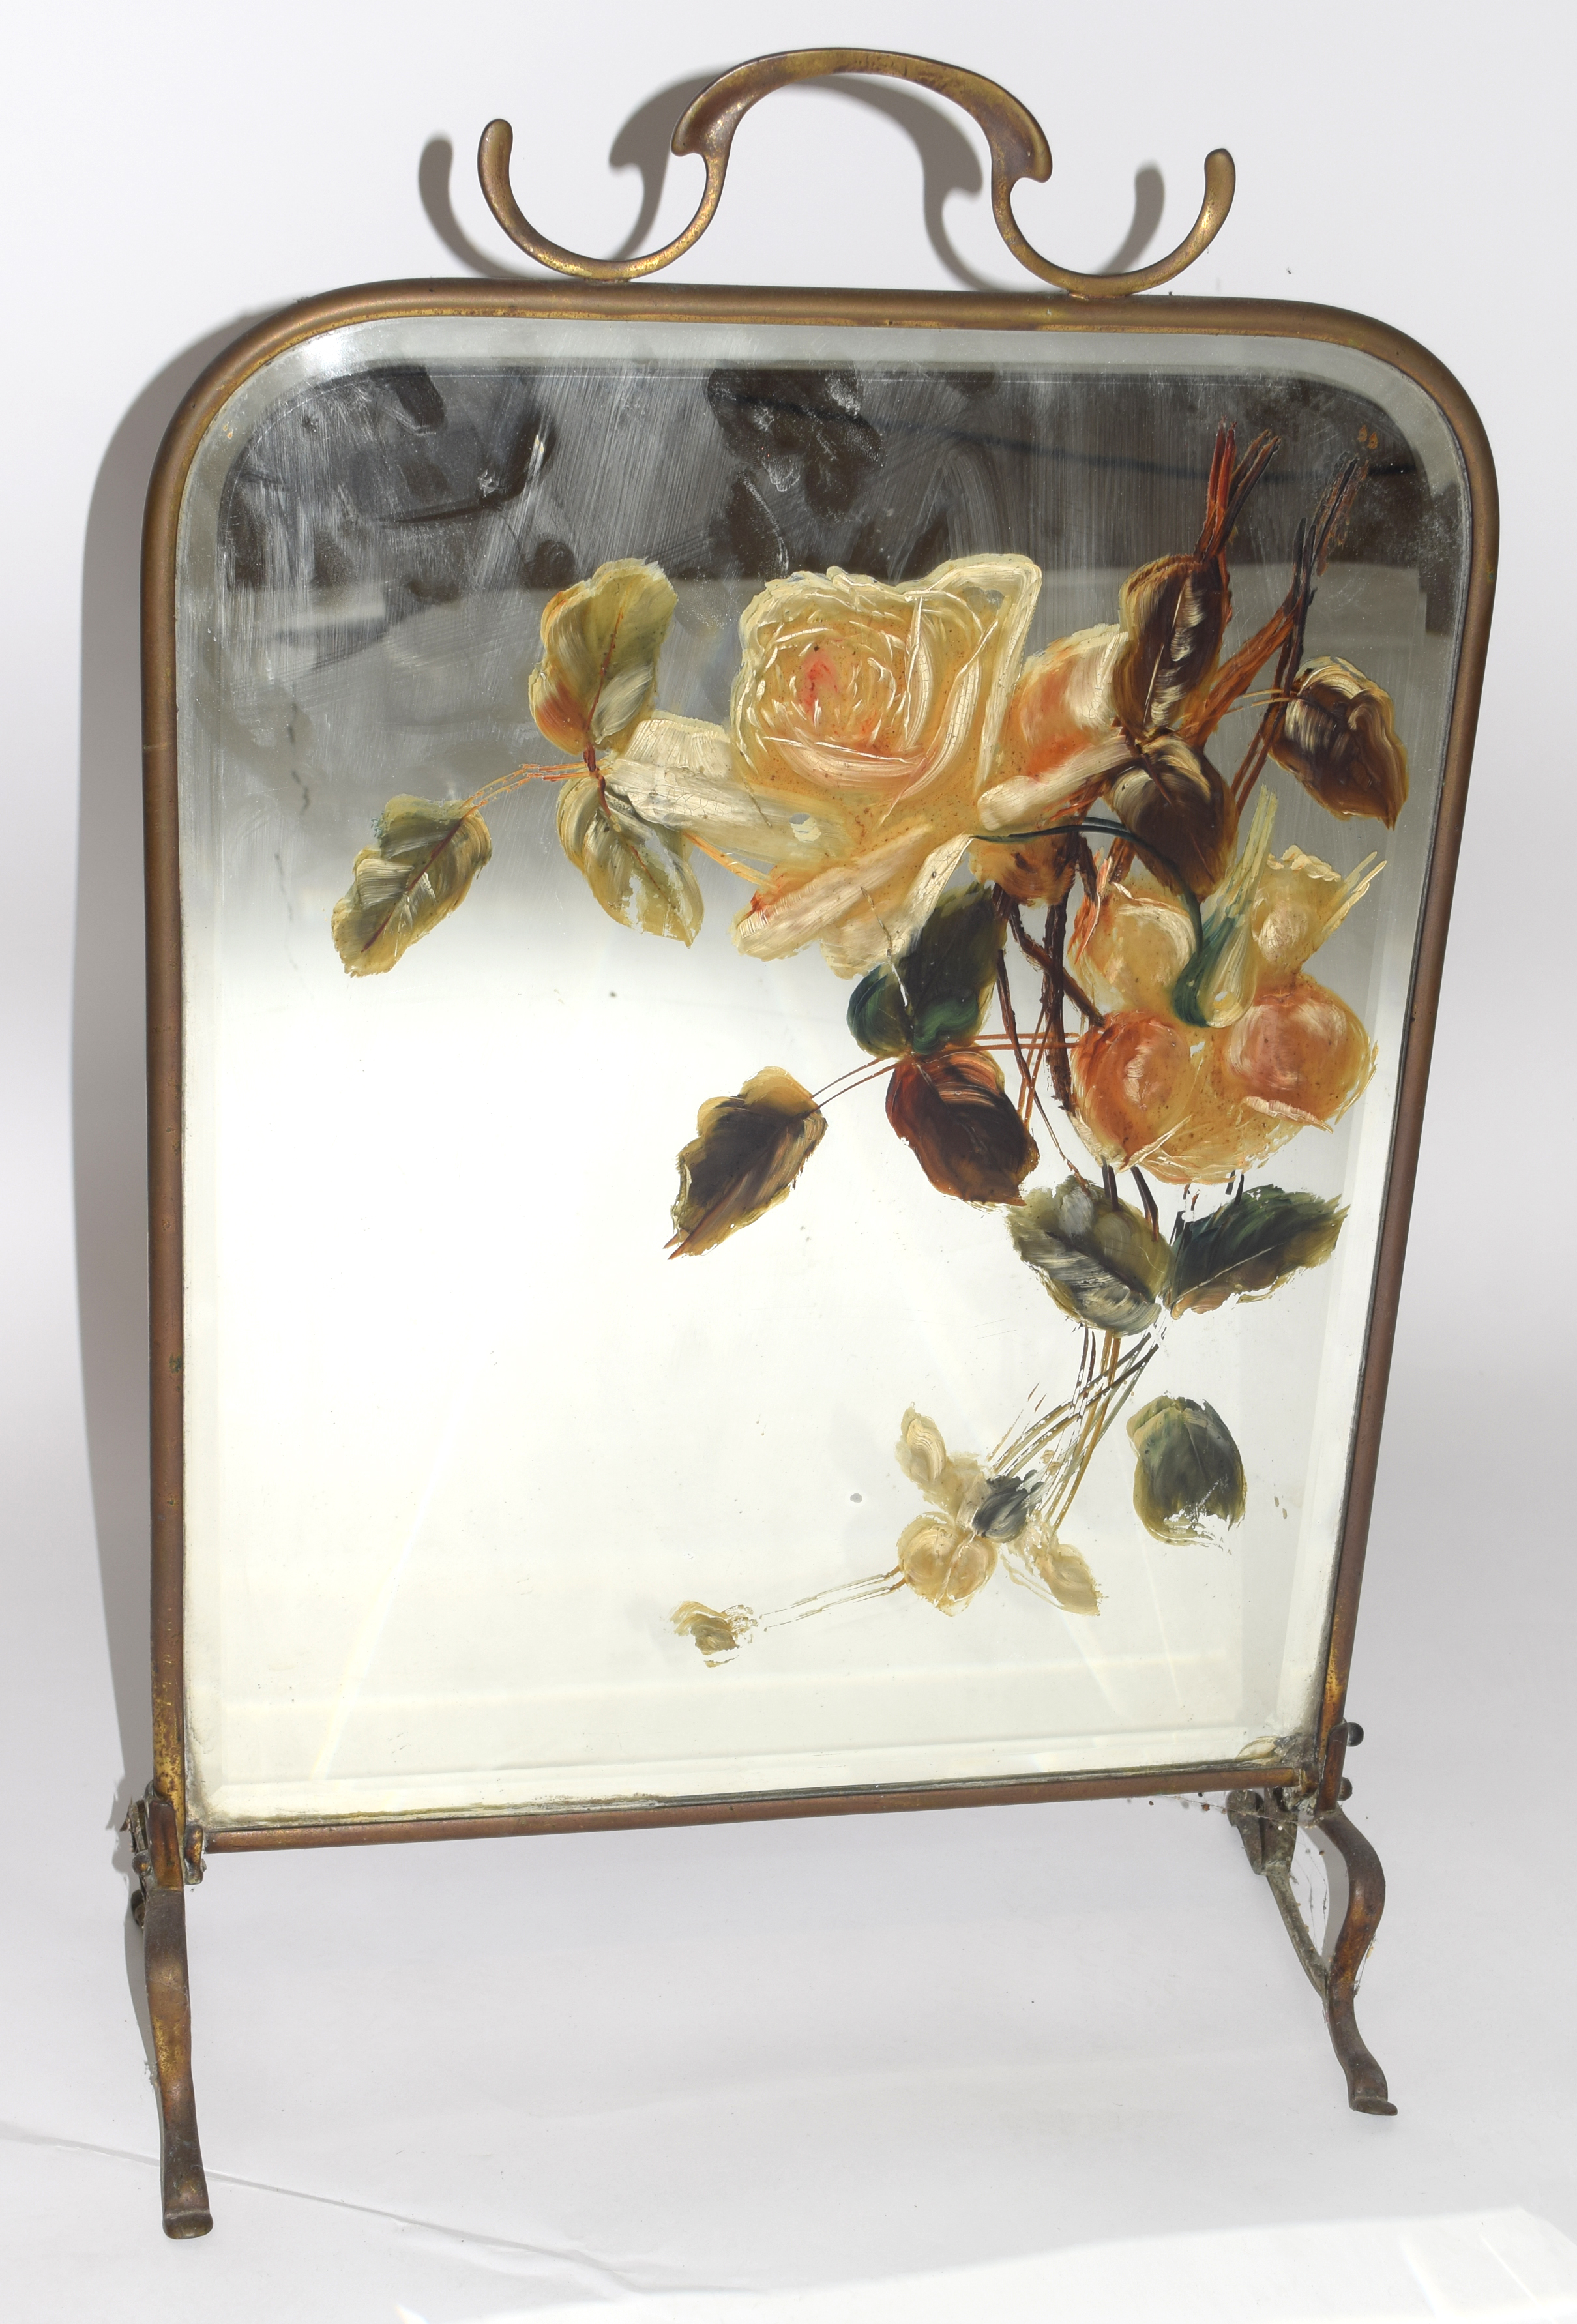 Early 20th century brass framed fire screen with central bevelled mirror with overpainted rose - Image 2 of 4